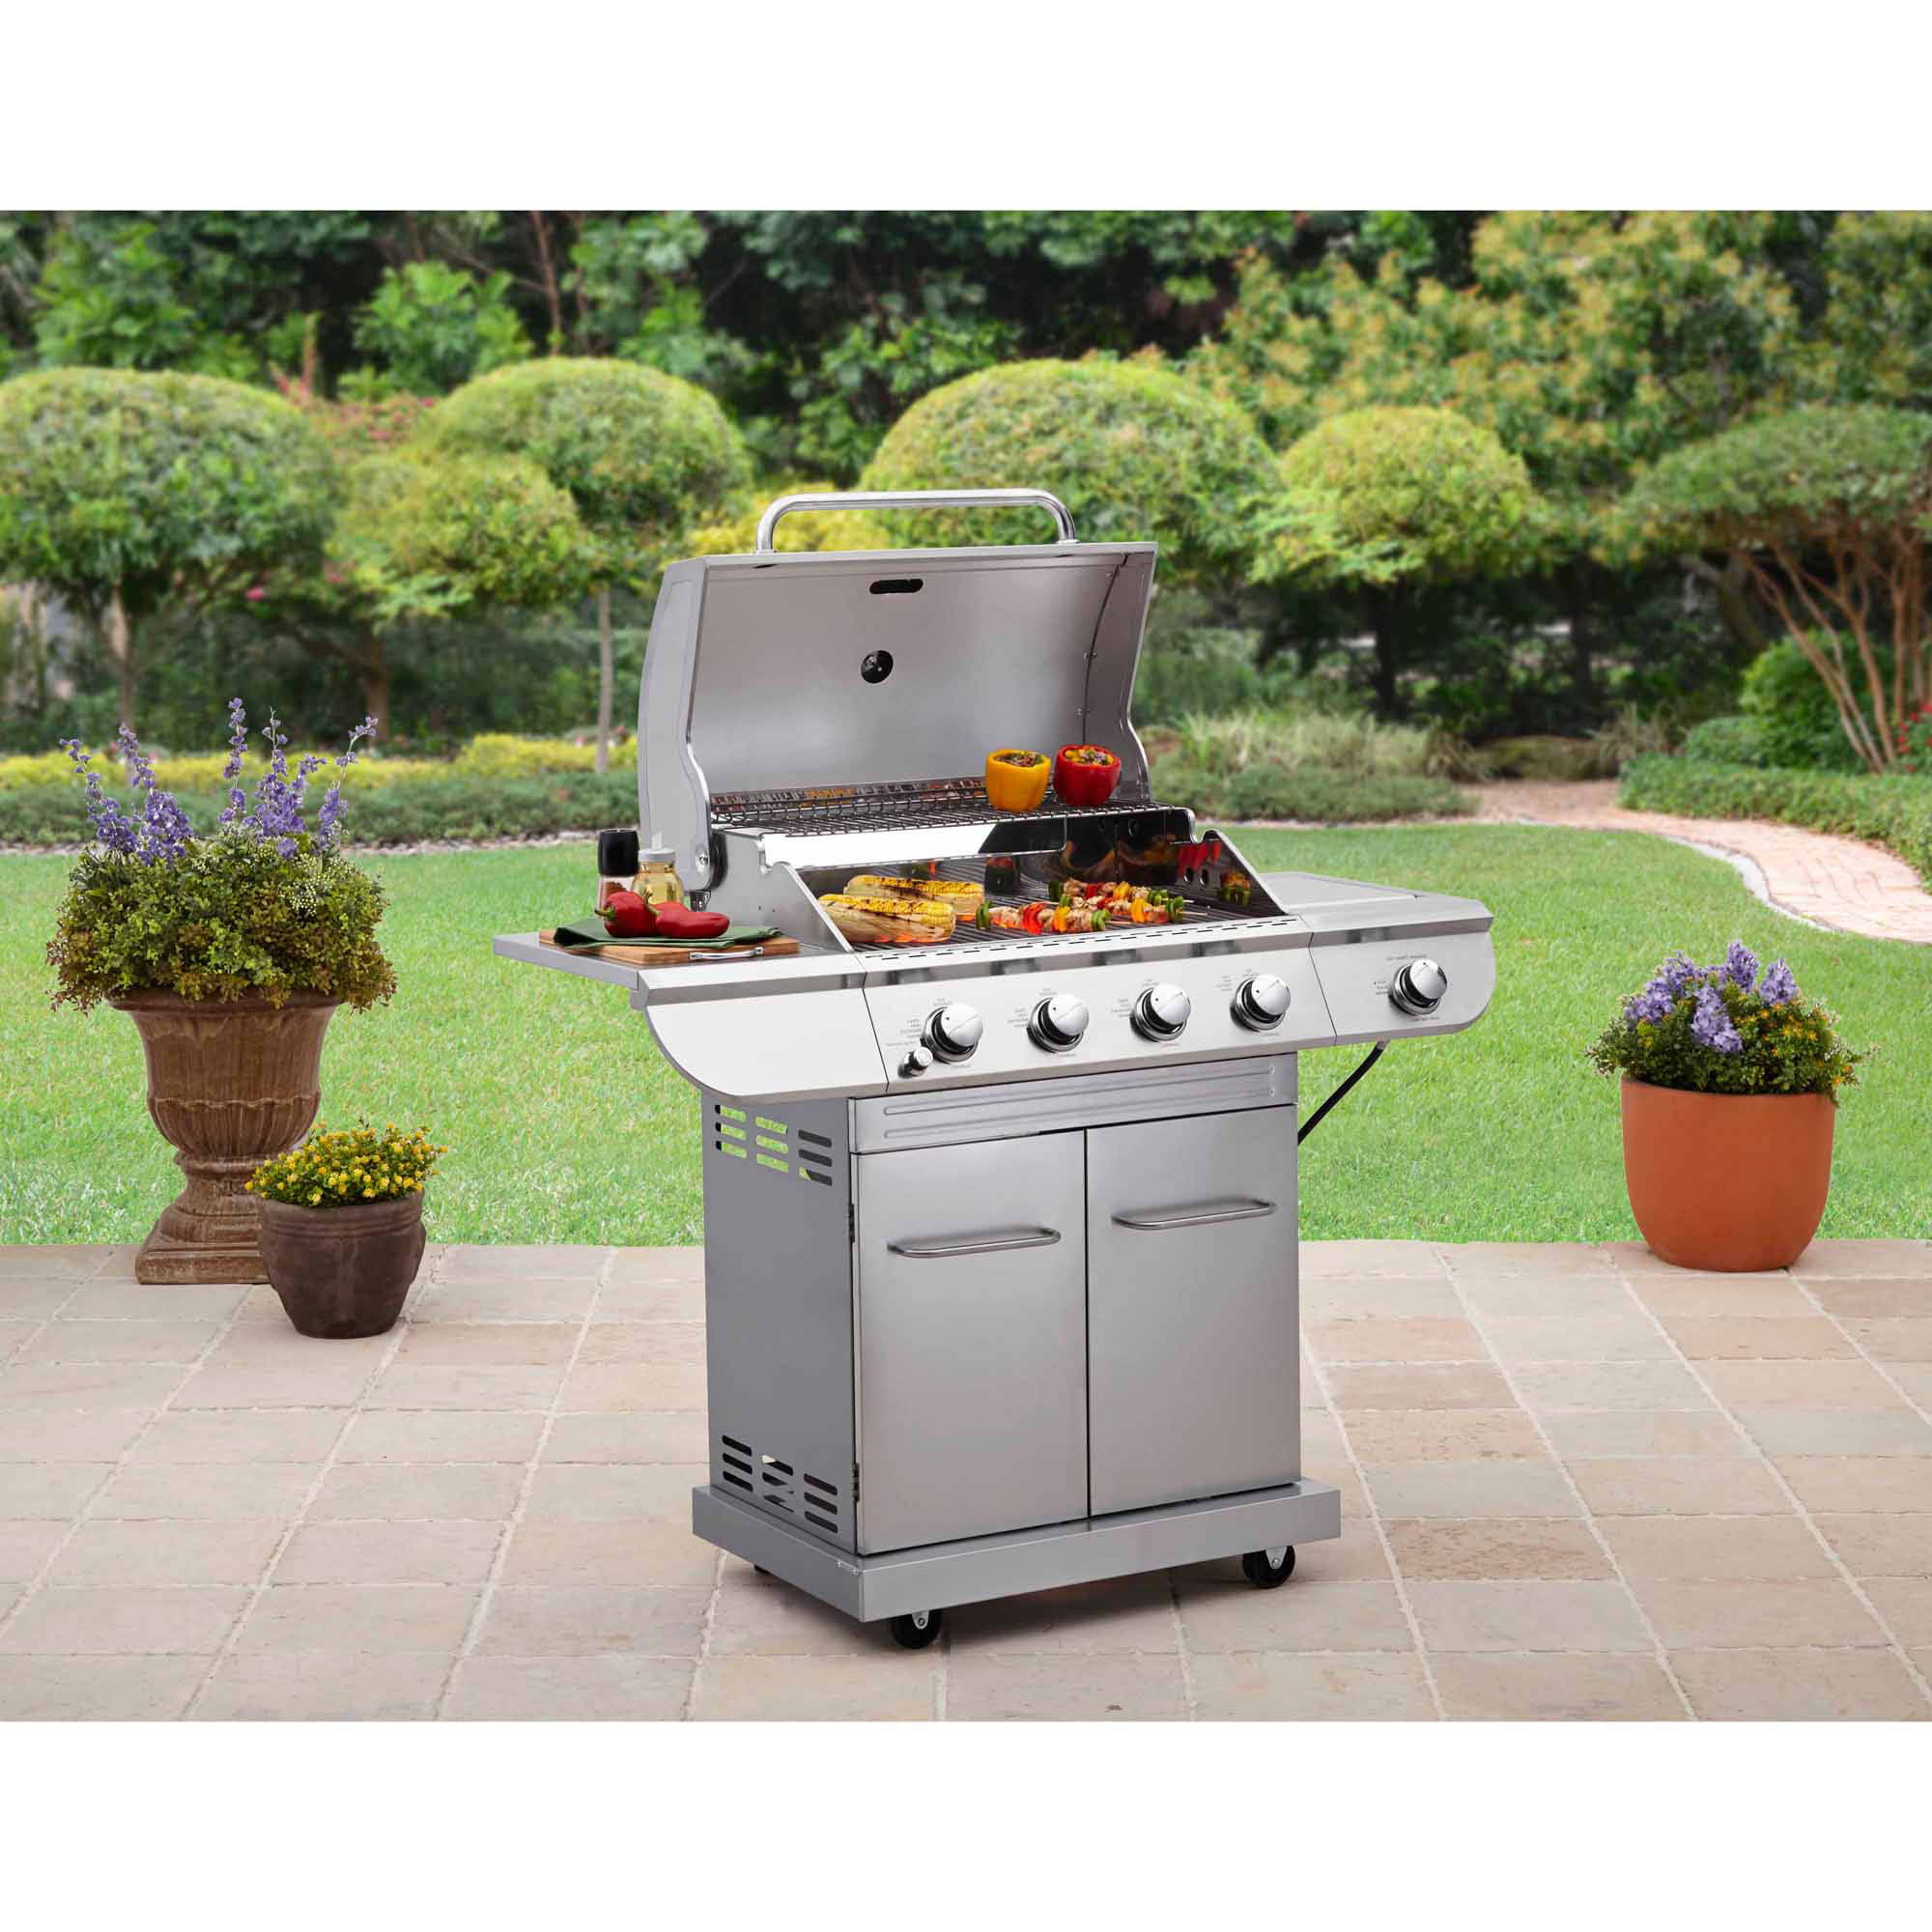 Better Homes and Gardens Stainless Steel 4-Burner Gas Grill with Side Burner